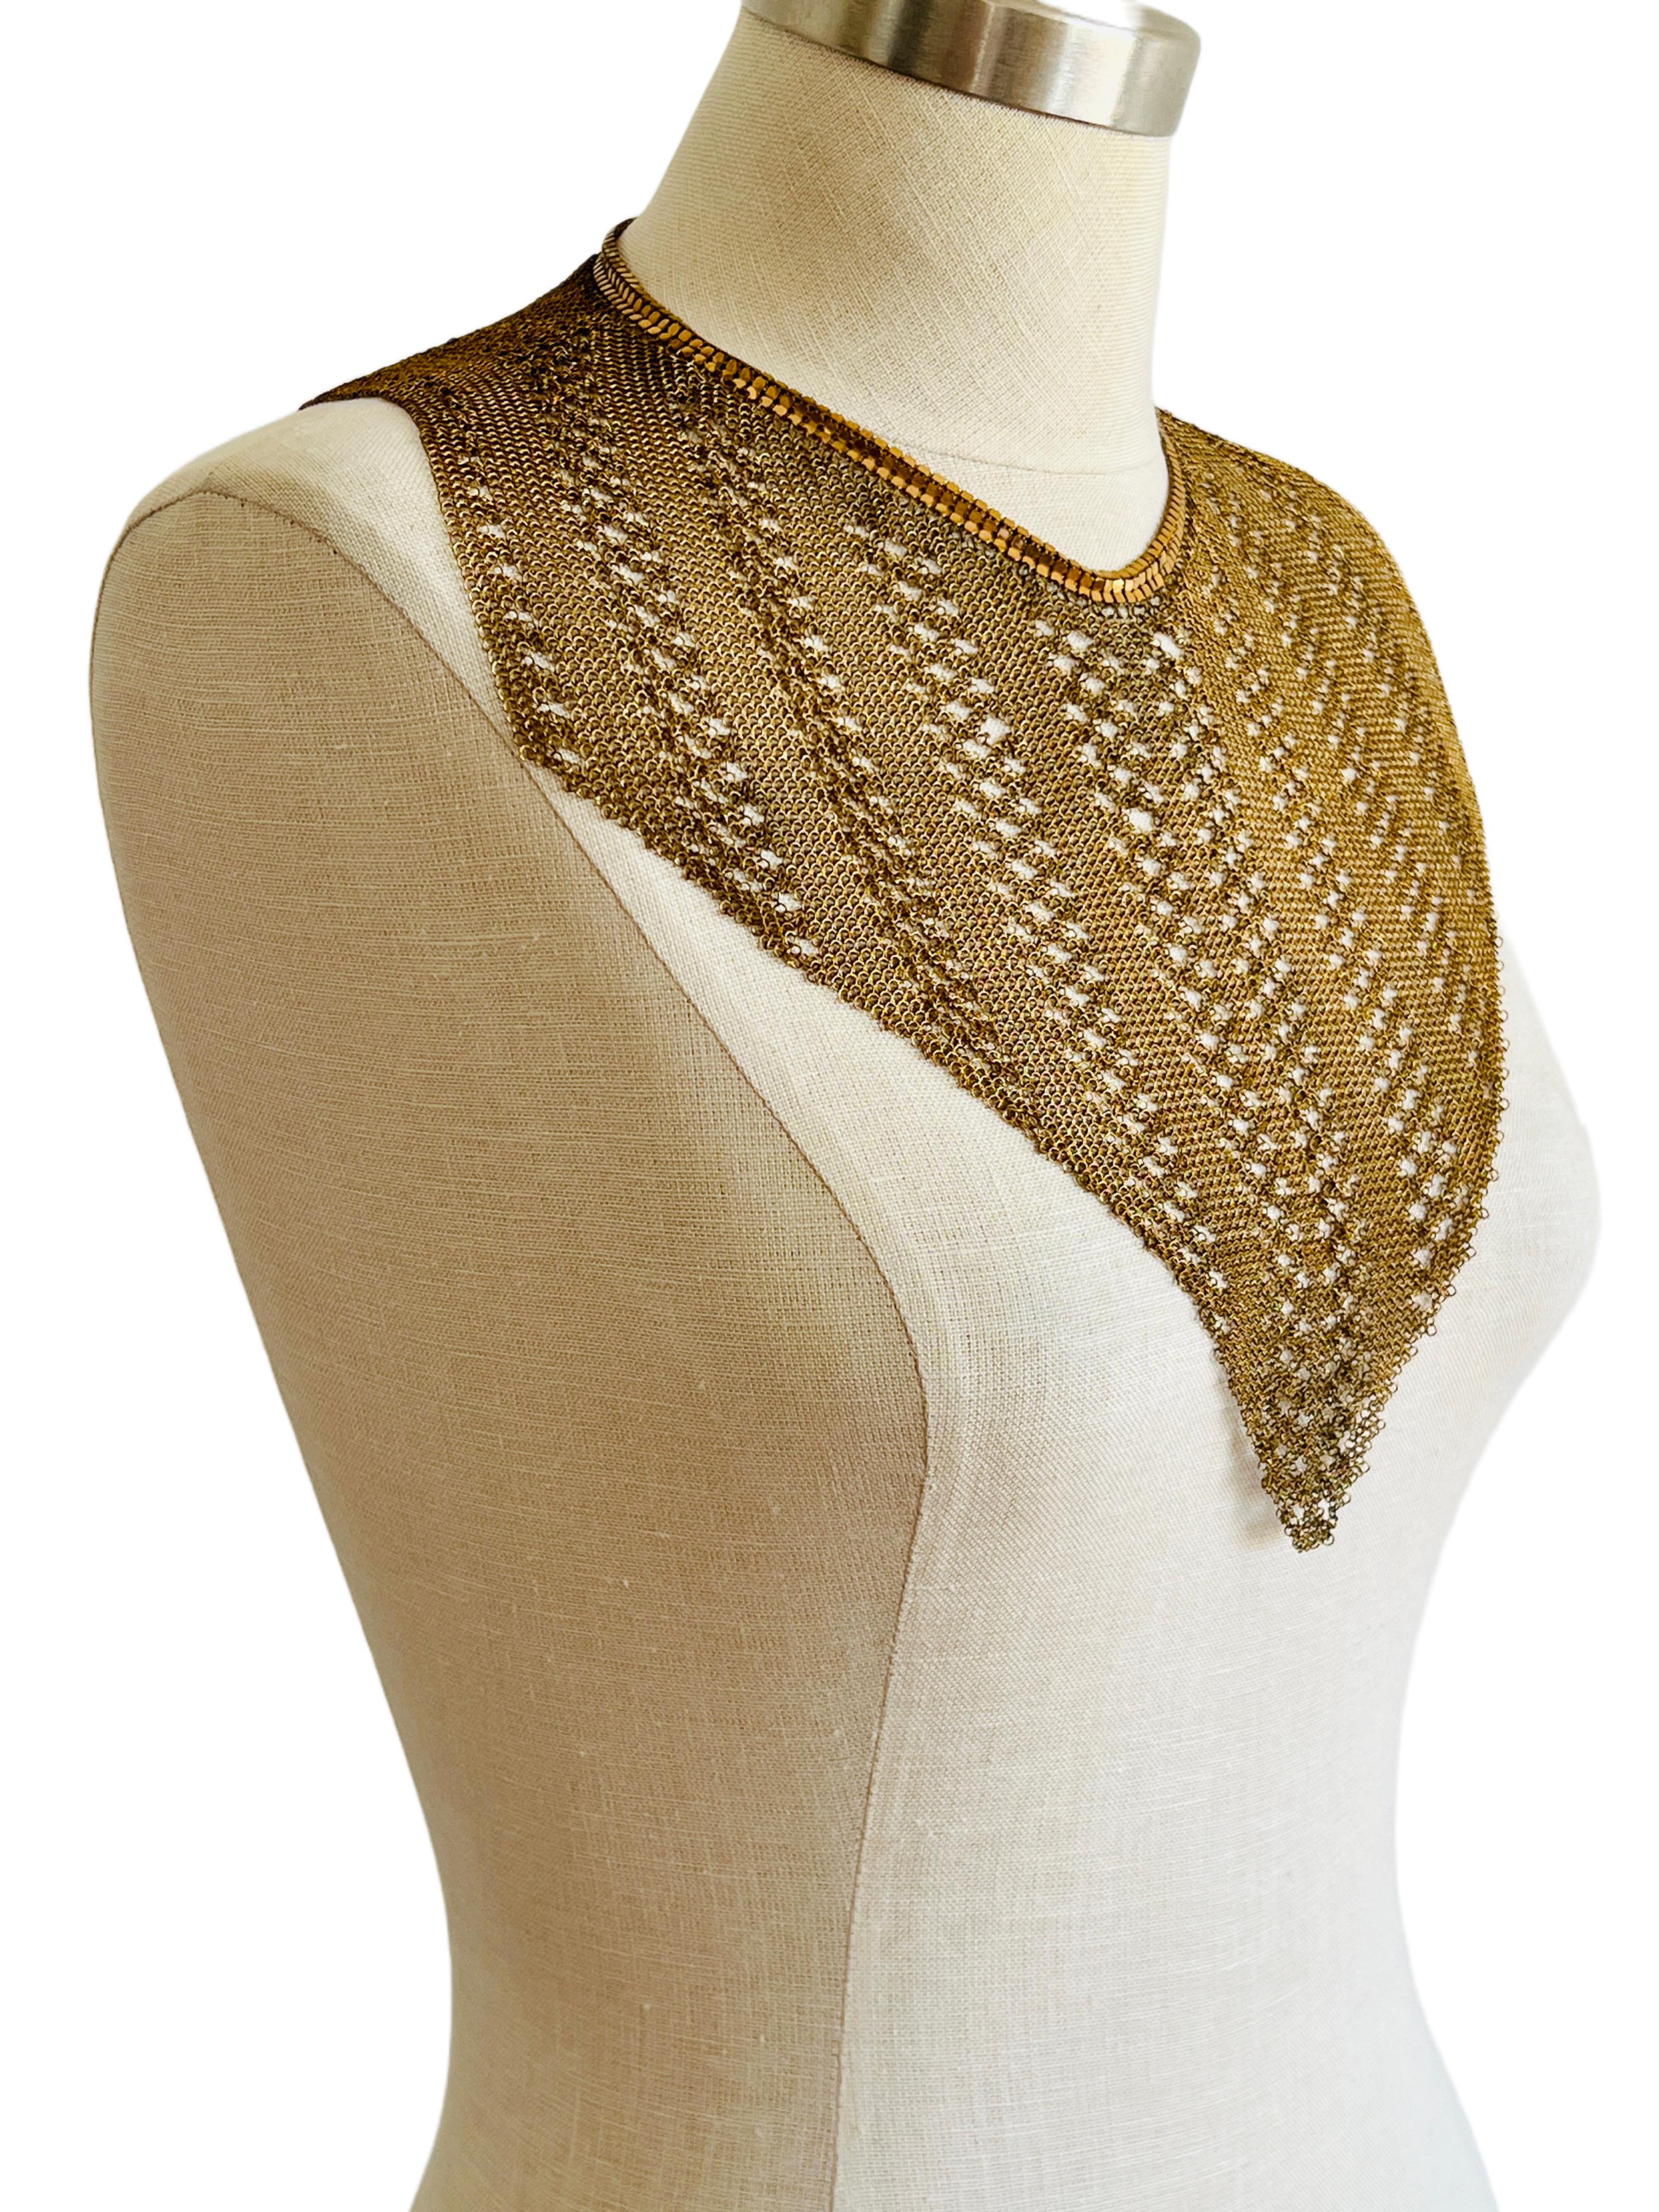 Retro Vintage Gold Mesh Bib Choker Collar Shoulder Necklace, Chain Mail Chainmaille 